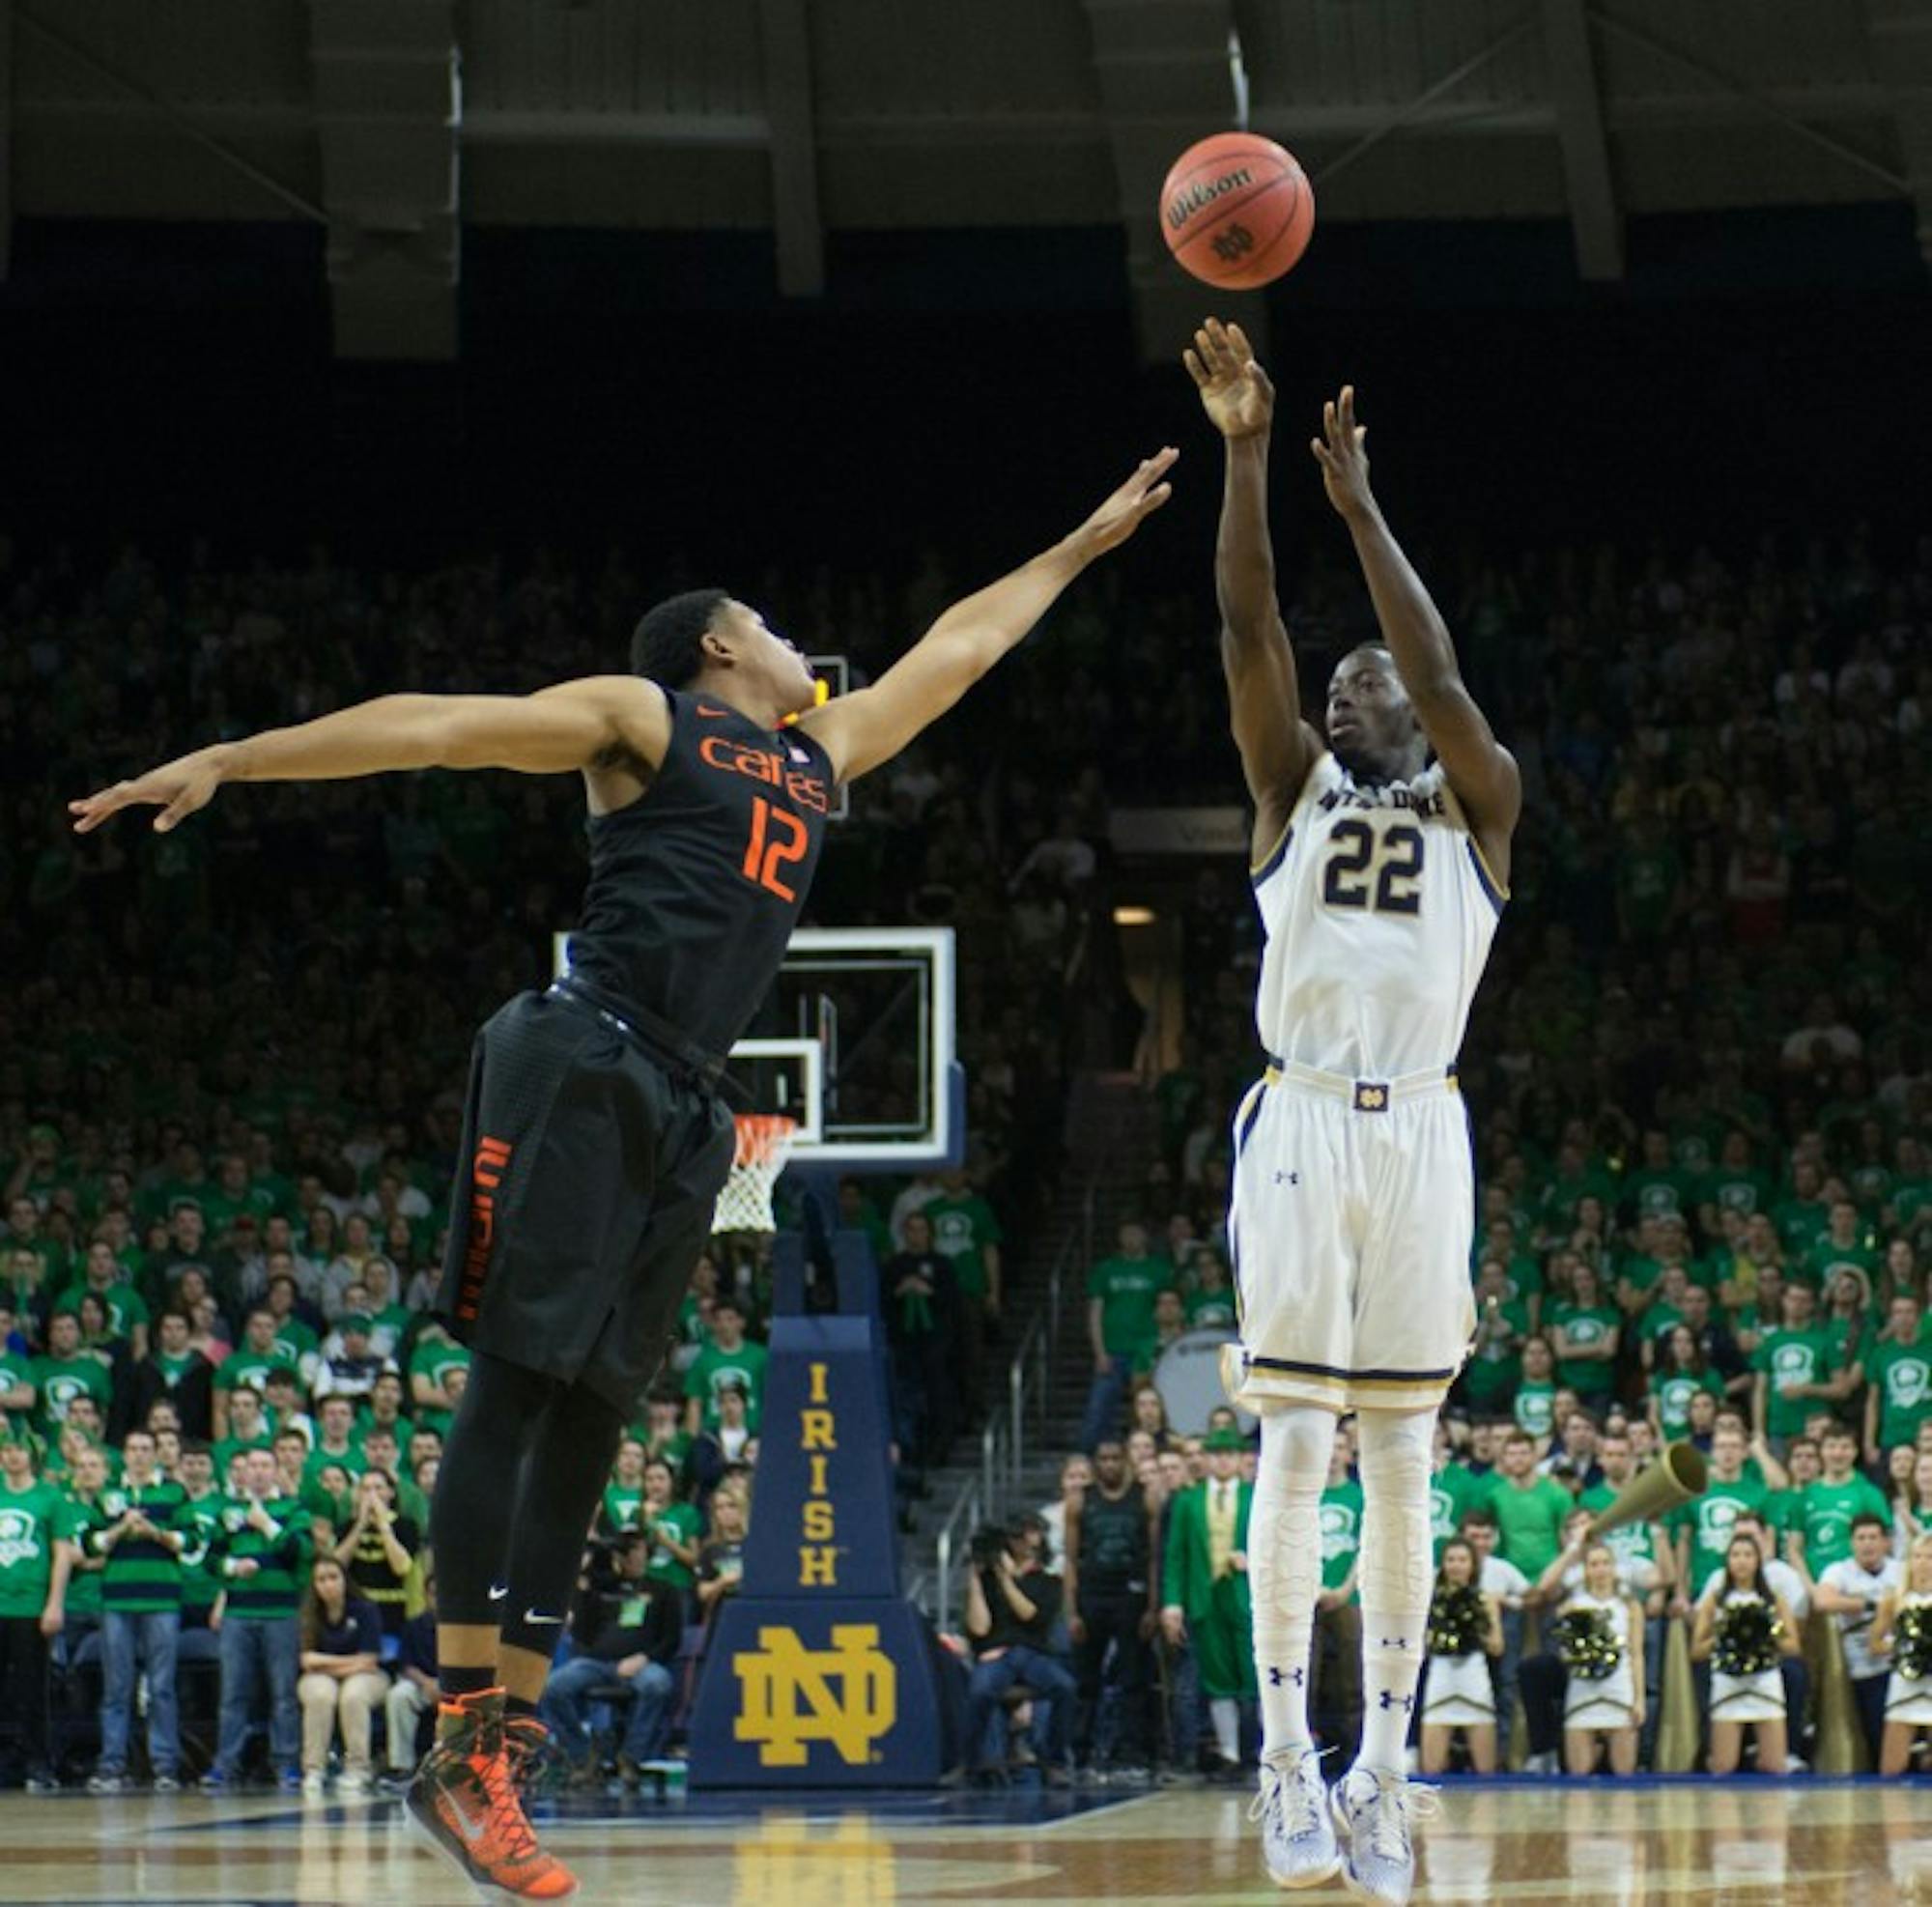 Senior guard Jerian Grant pulls up for a shot during Notre Dame’s 75-70 win over Miami on Jan. 17 at Purcell Pavilion.